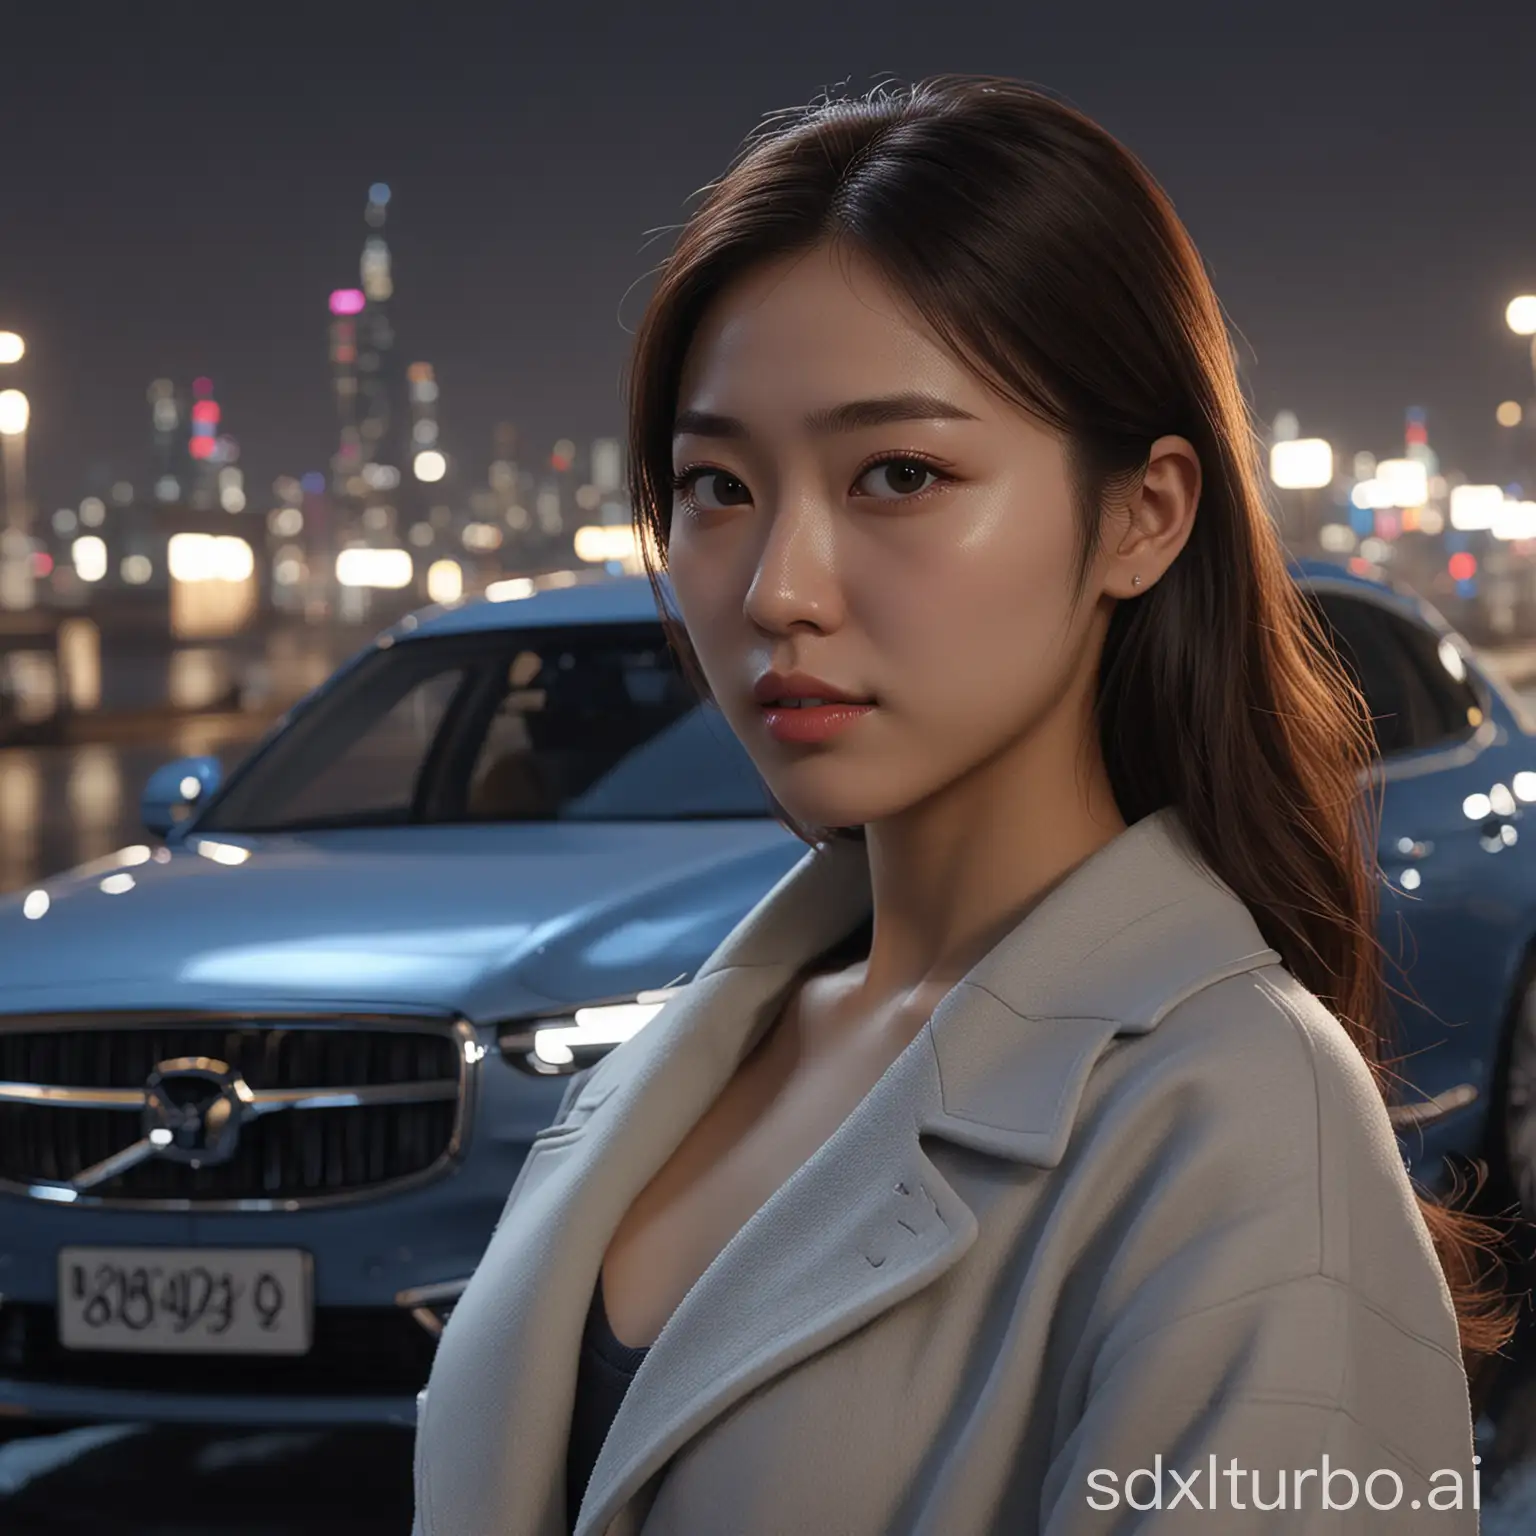 Stylish-Korean-Girl-with-a-Volvo-S90-in-Nighttime-Seoul